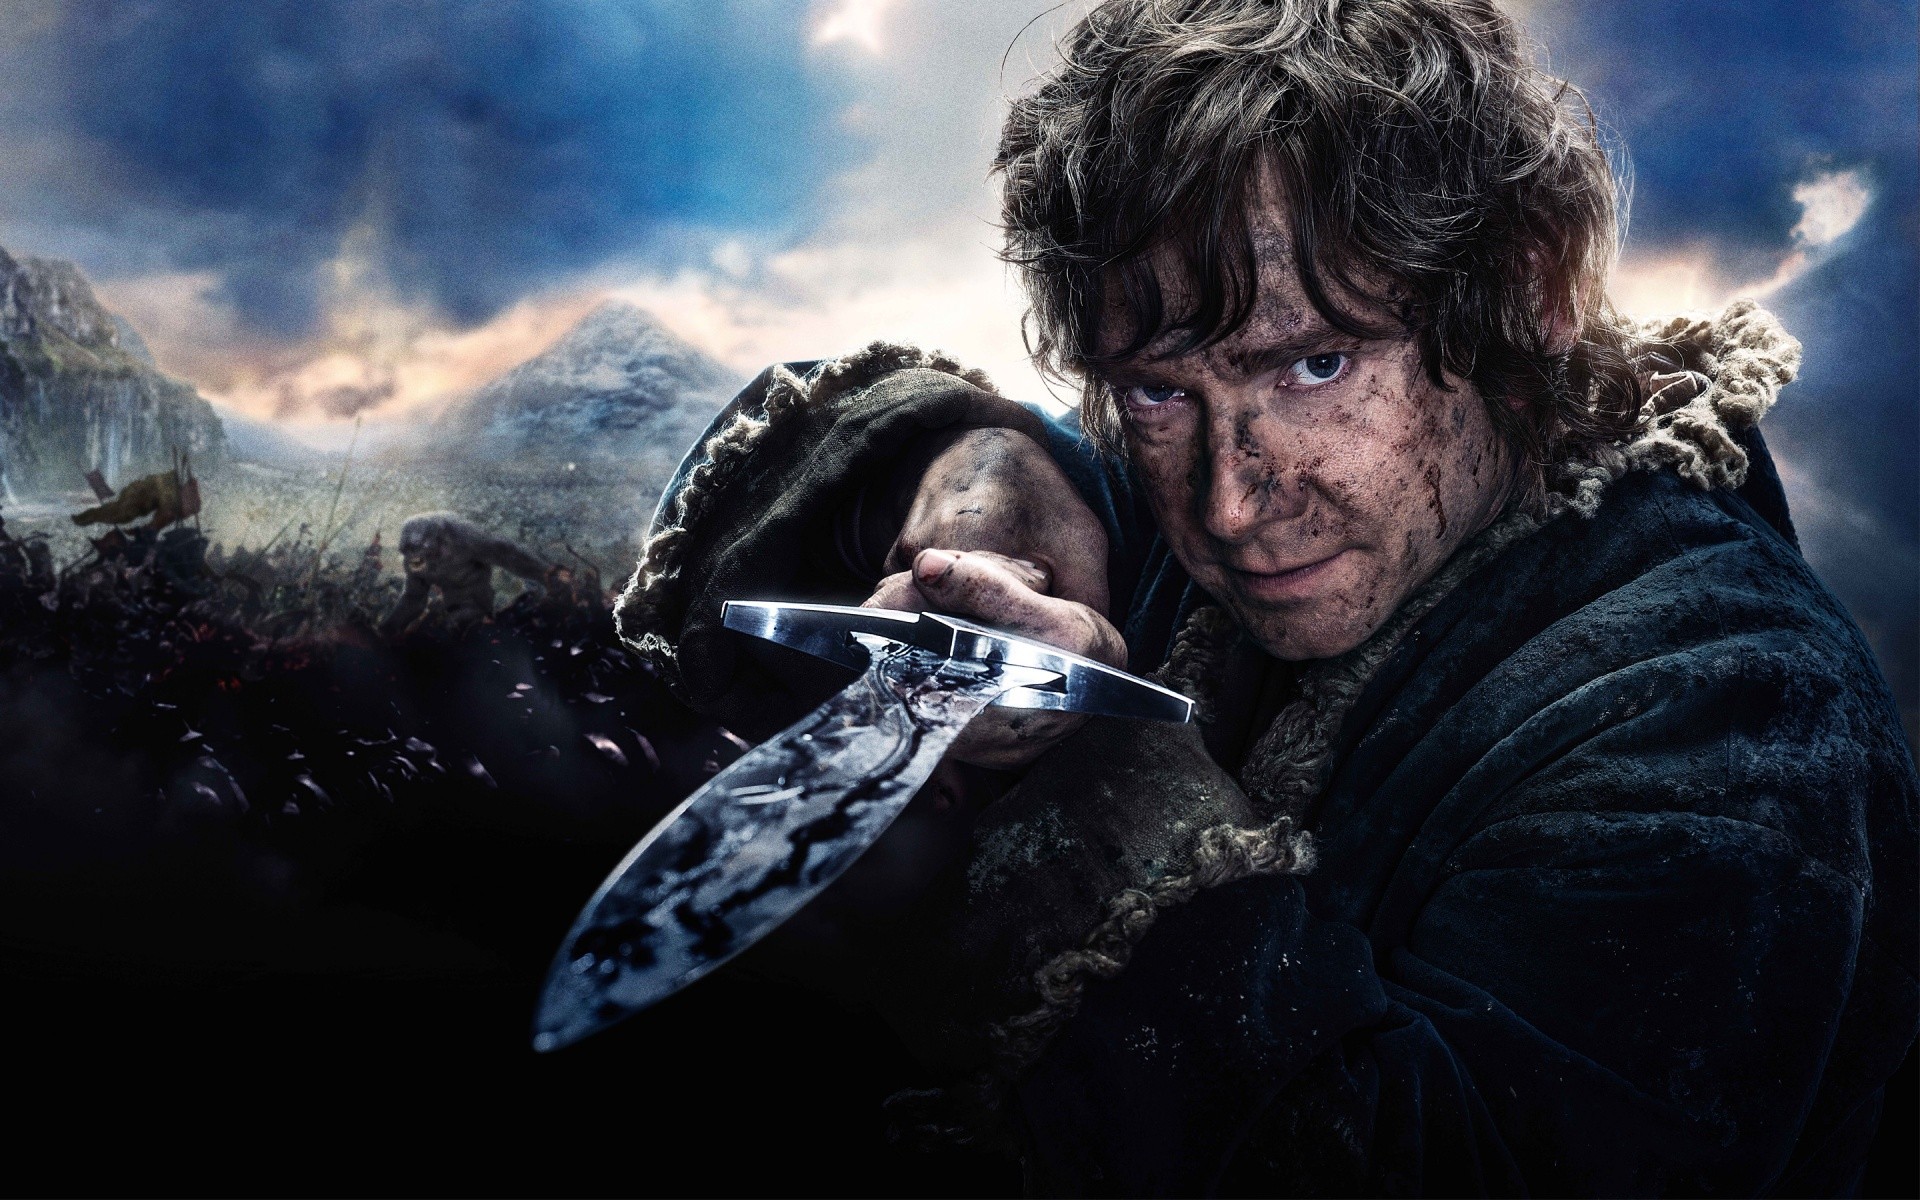 Wallpapers movies hobbit special effects on the desktop